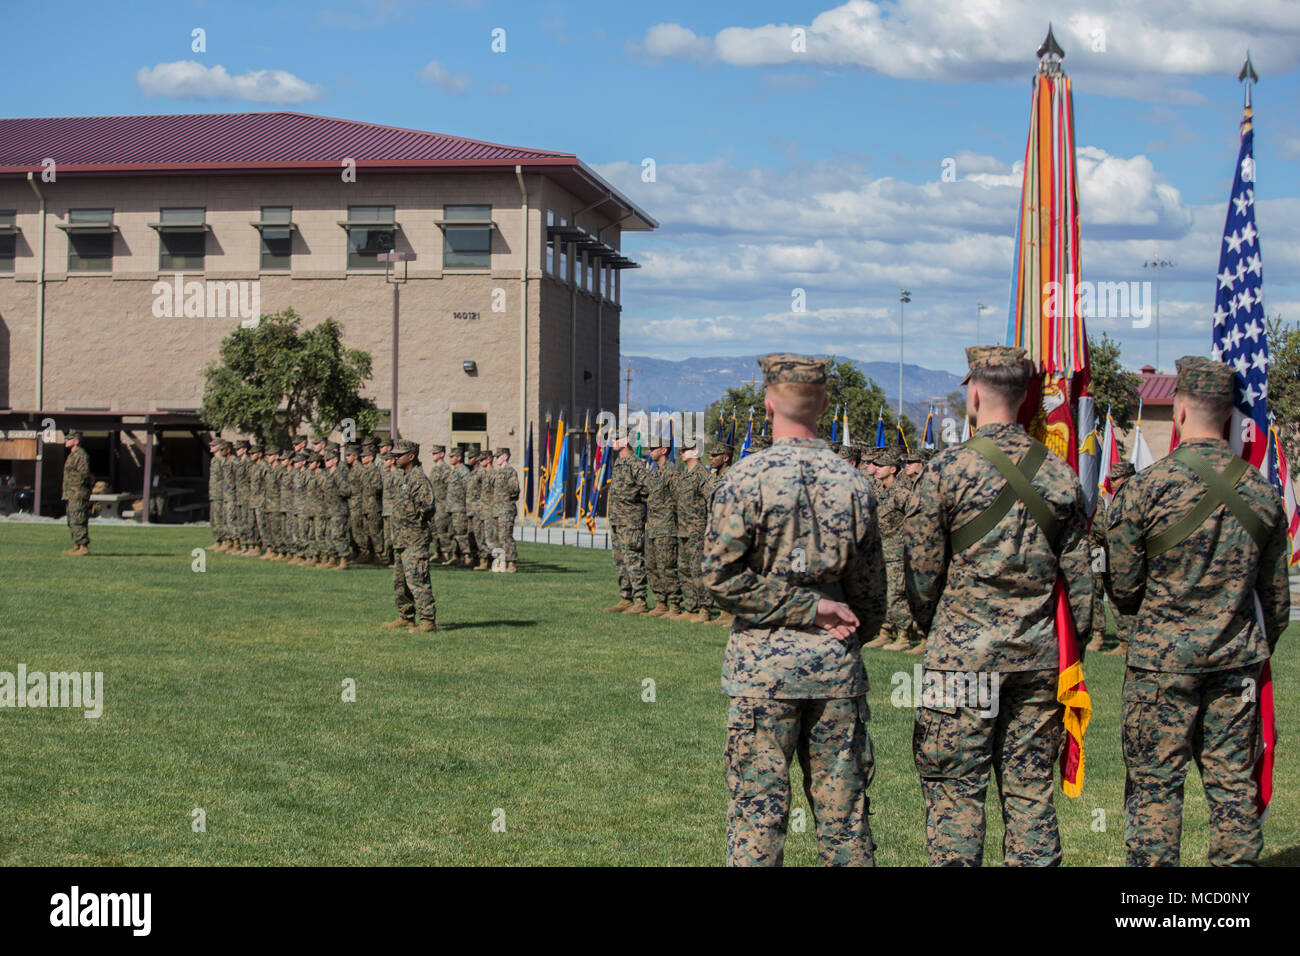 U.S. Marines and Sailors with 1st Marine Logistics Group stand in formation before the appointment ceremony for Master Chief Petty Officer Zachary Pryor, who will become the command master chief for the 1st MLG, at Camp Pendleton, Calif., Feb. 13, 2018. Pryor was appointed as the command master chief for all medical and dental personnel within the 1st MLG. (U.S. Marine Corps photo by Cpl. Adam Dublinske) Stock Photo